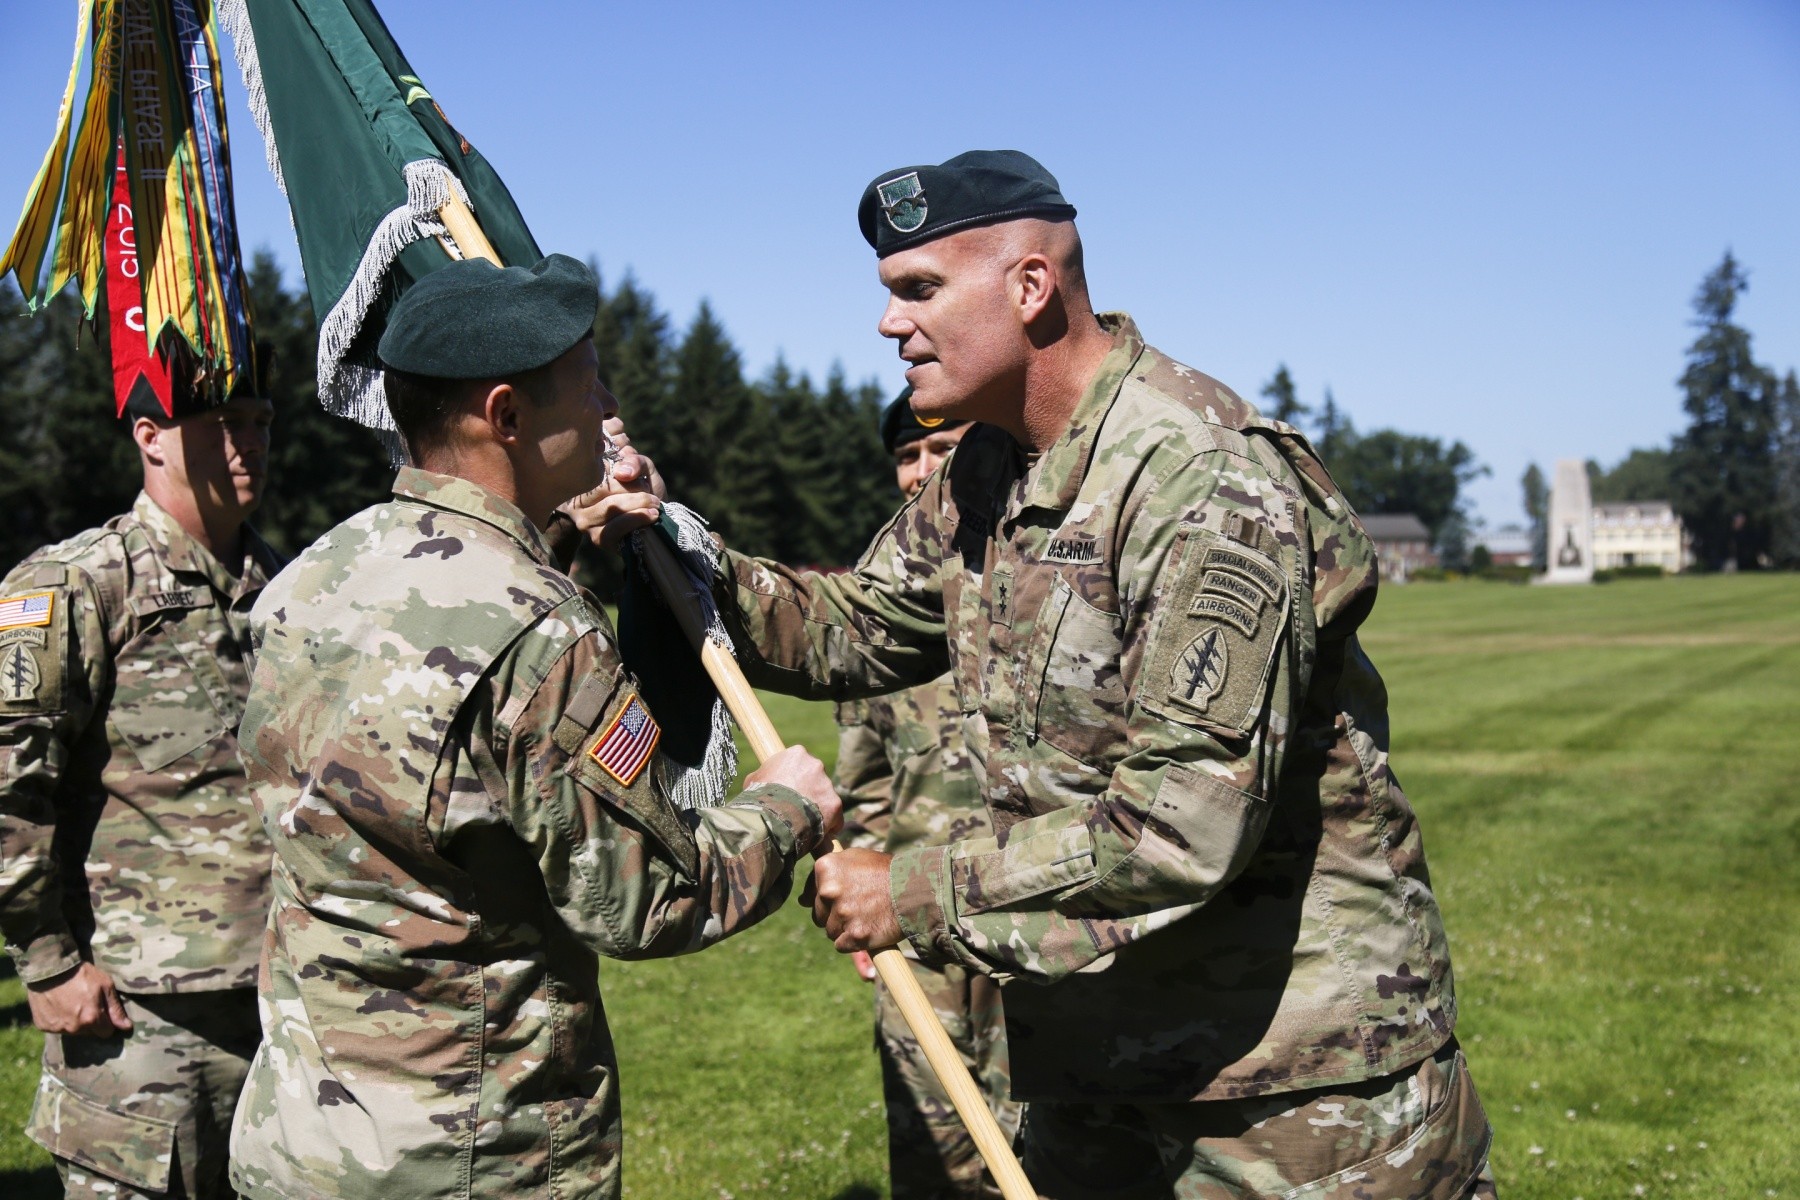 Ray Returns to Assume Command of 1st SFG (A) | Article | The United ...